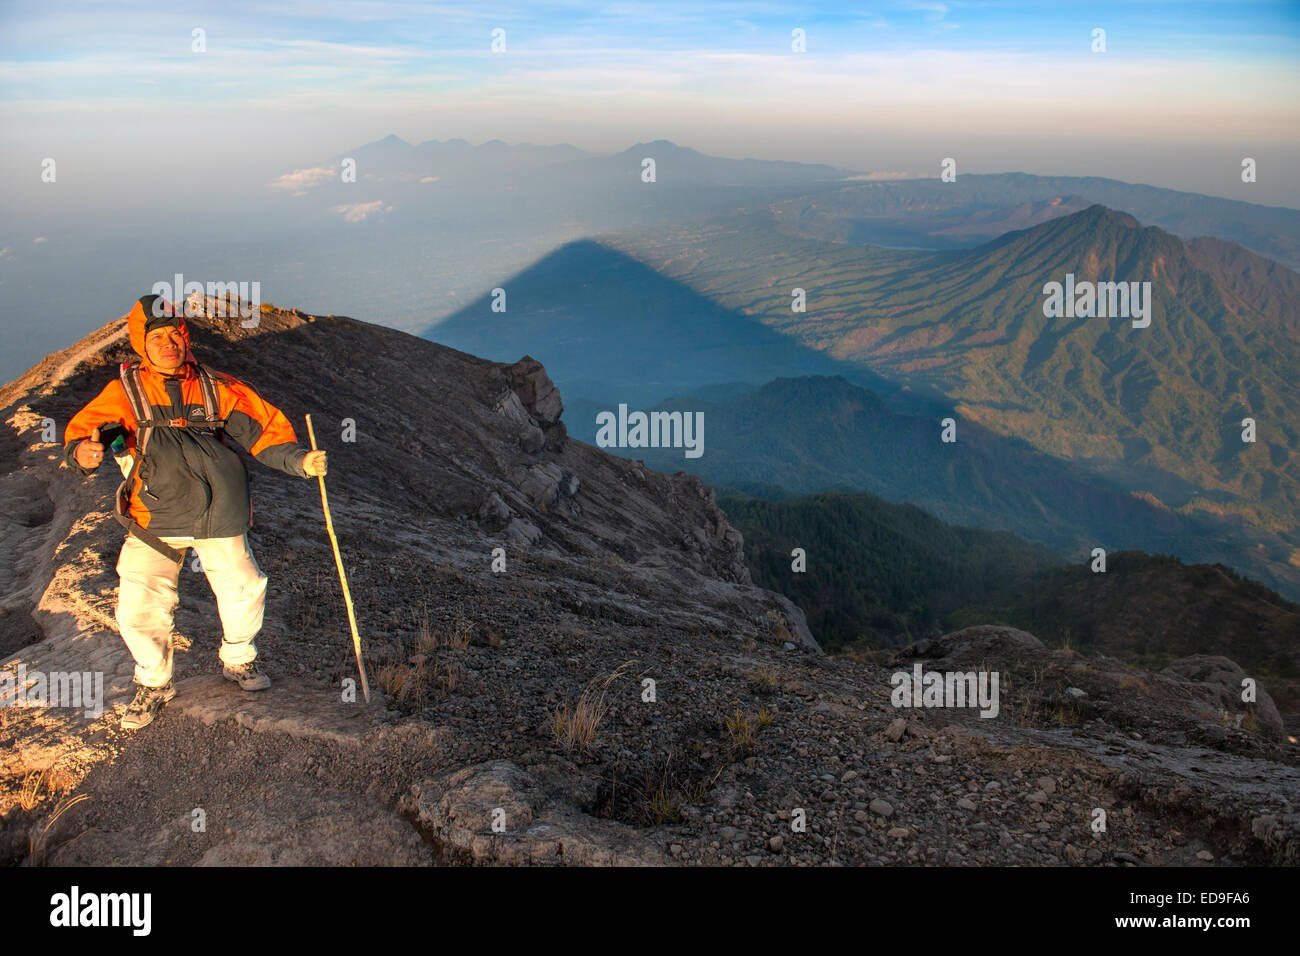 Balinese guide on the path leading to the summit of Gunung Agung (3142m), the highest volcano on the island of Bali, Indonesia. Stock Photo